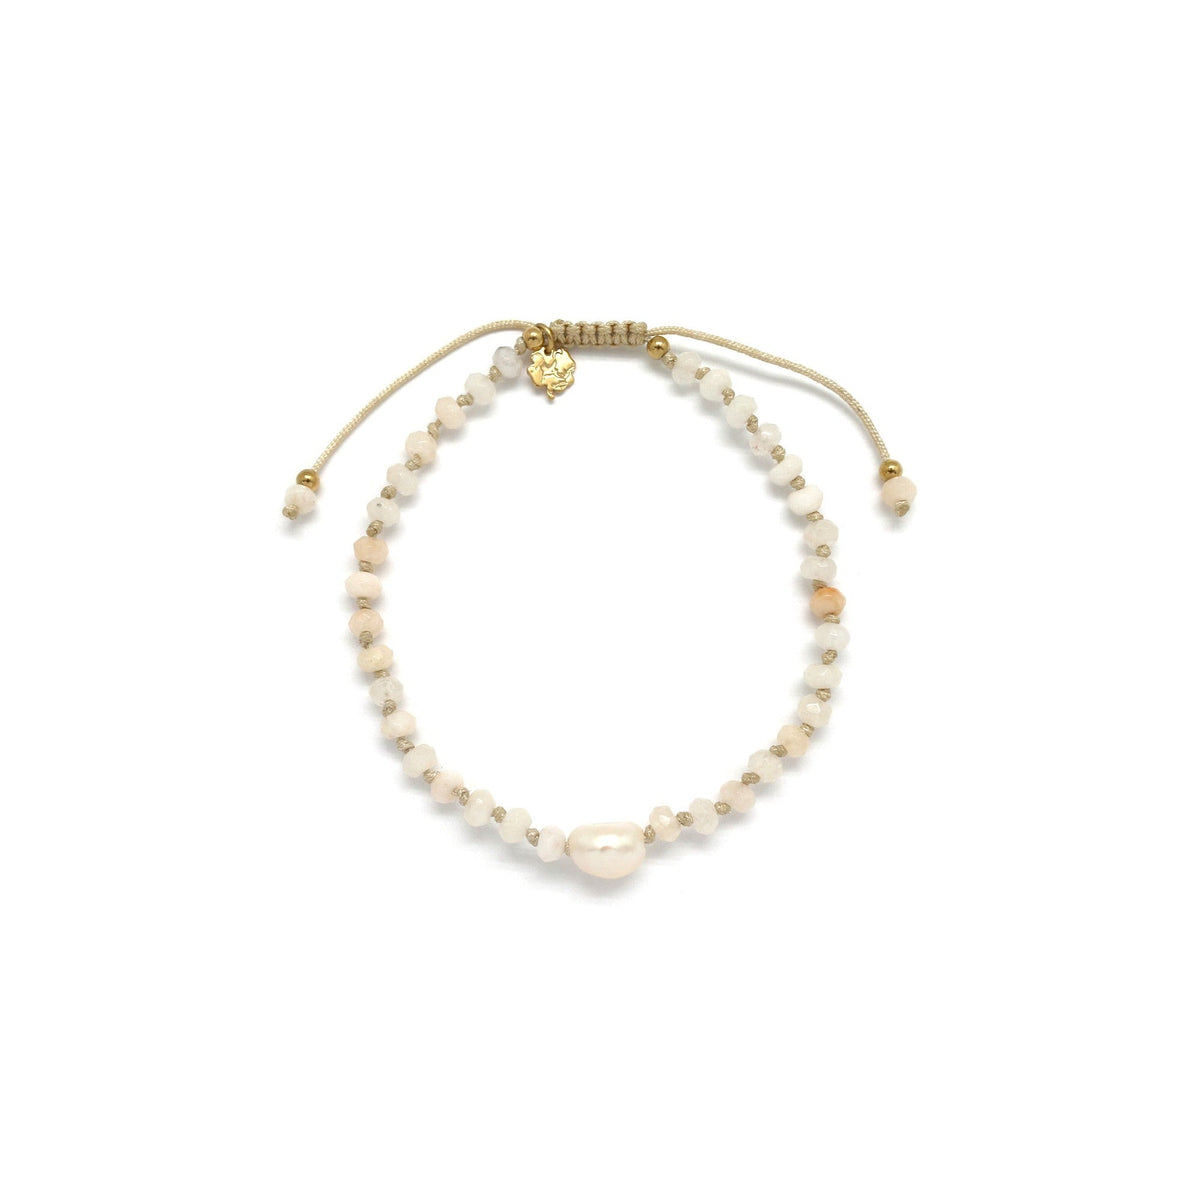 Adjustable calcite bracelet with pearl